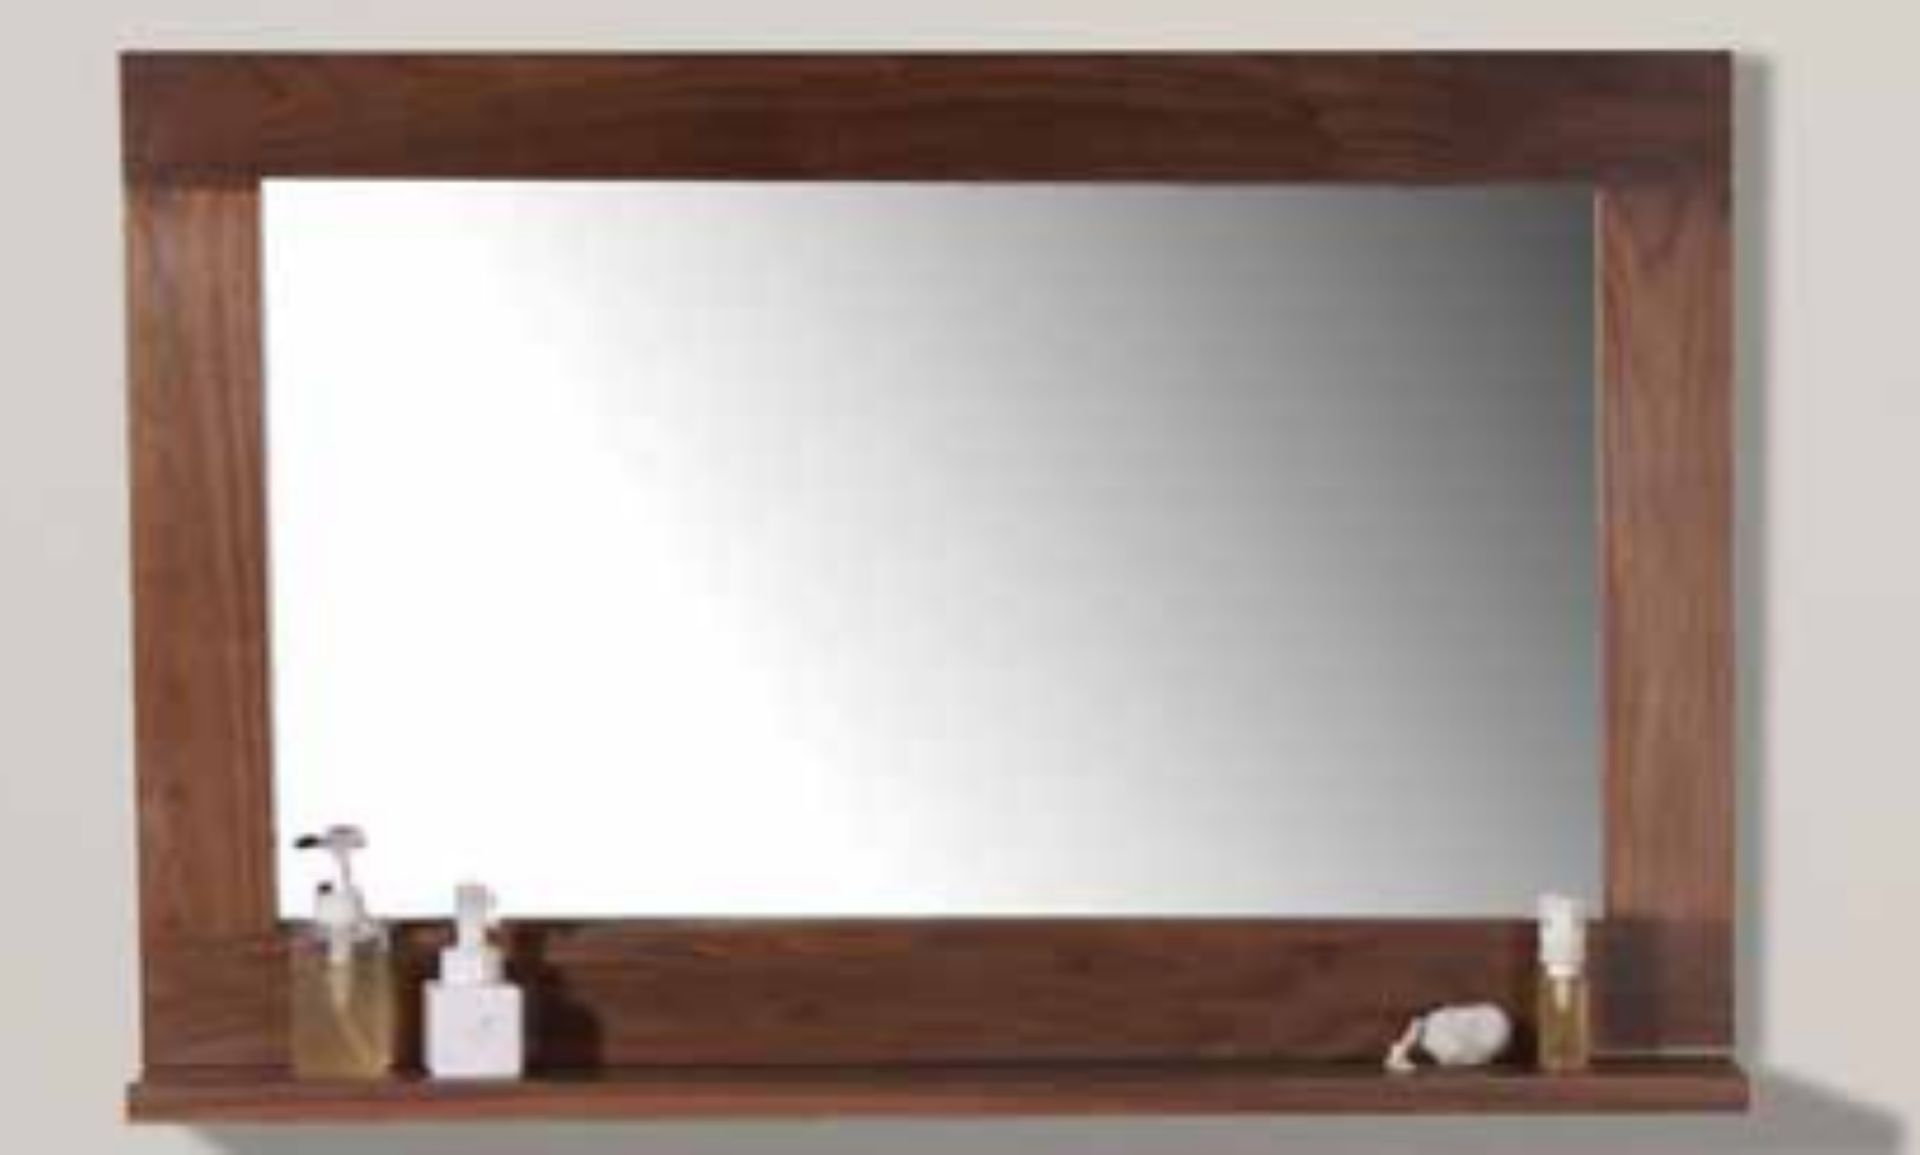 1 x Stonearth Bathroom Wall Mirror With Solid Walnut Frame and Bevelled Glass Mirror - Size: Large - Image 3 of 7